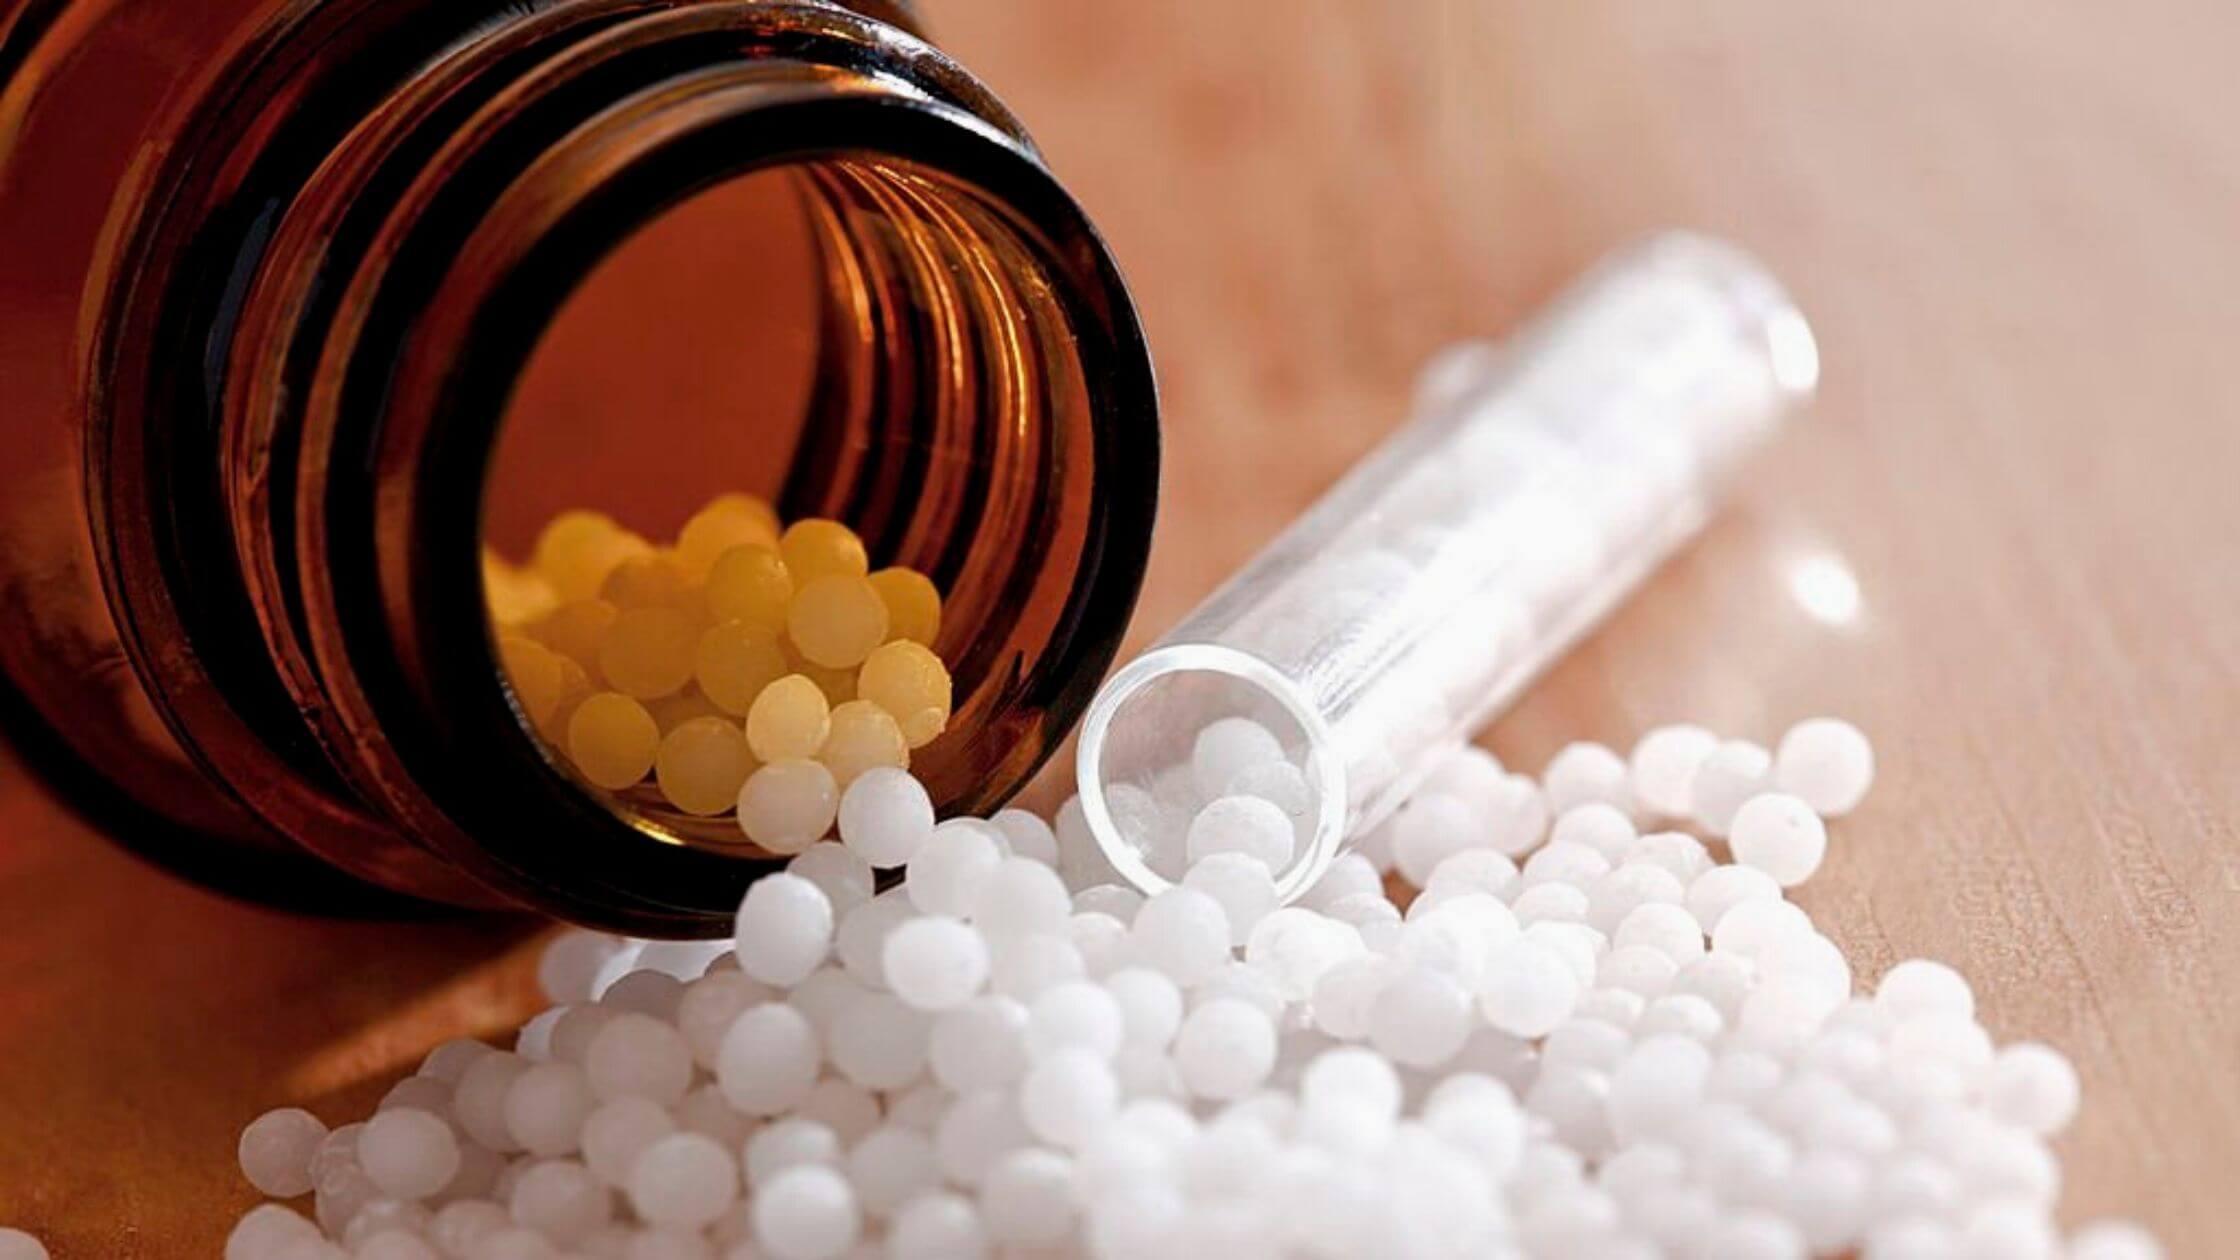 Homeopathy Is Effective In Treating Neuro Conditions Data Shows